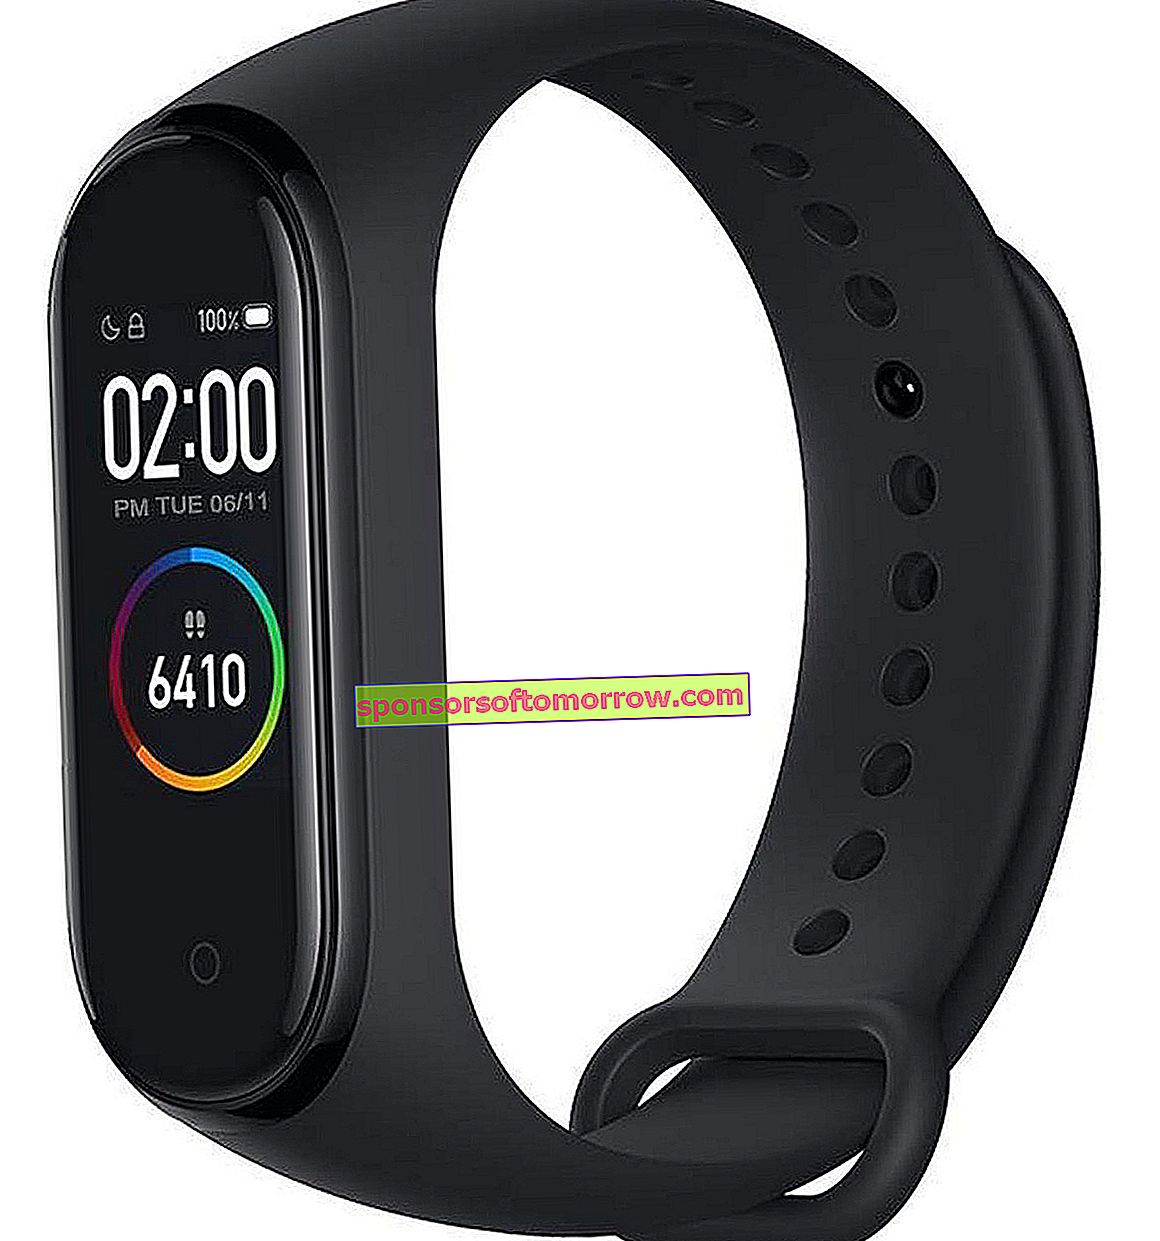 8 apps to get the most out of the Xiaomi Mi Band 1